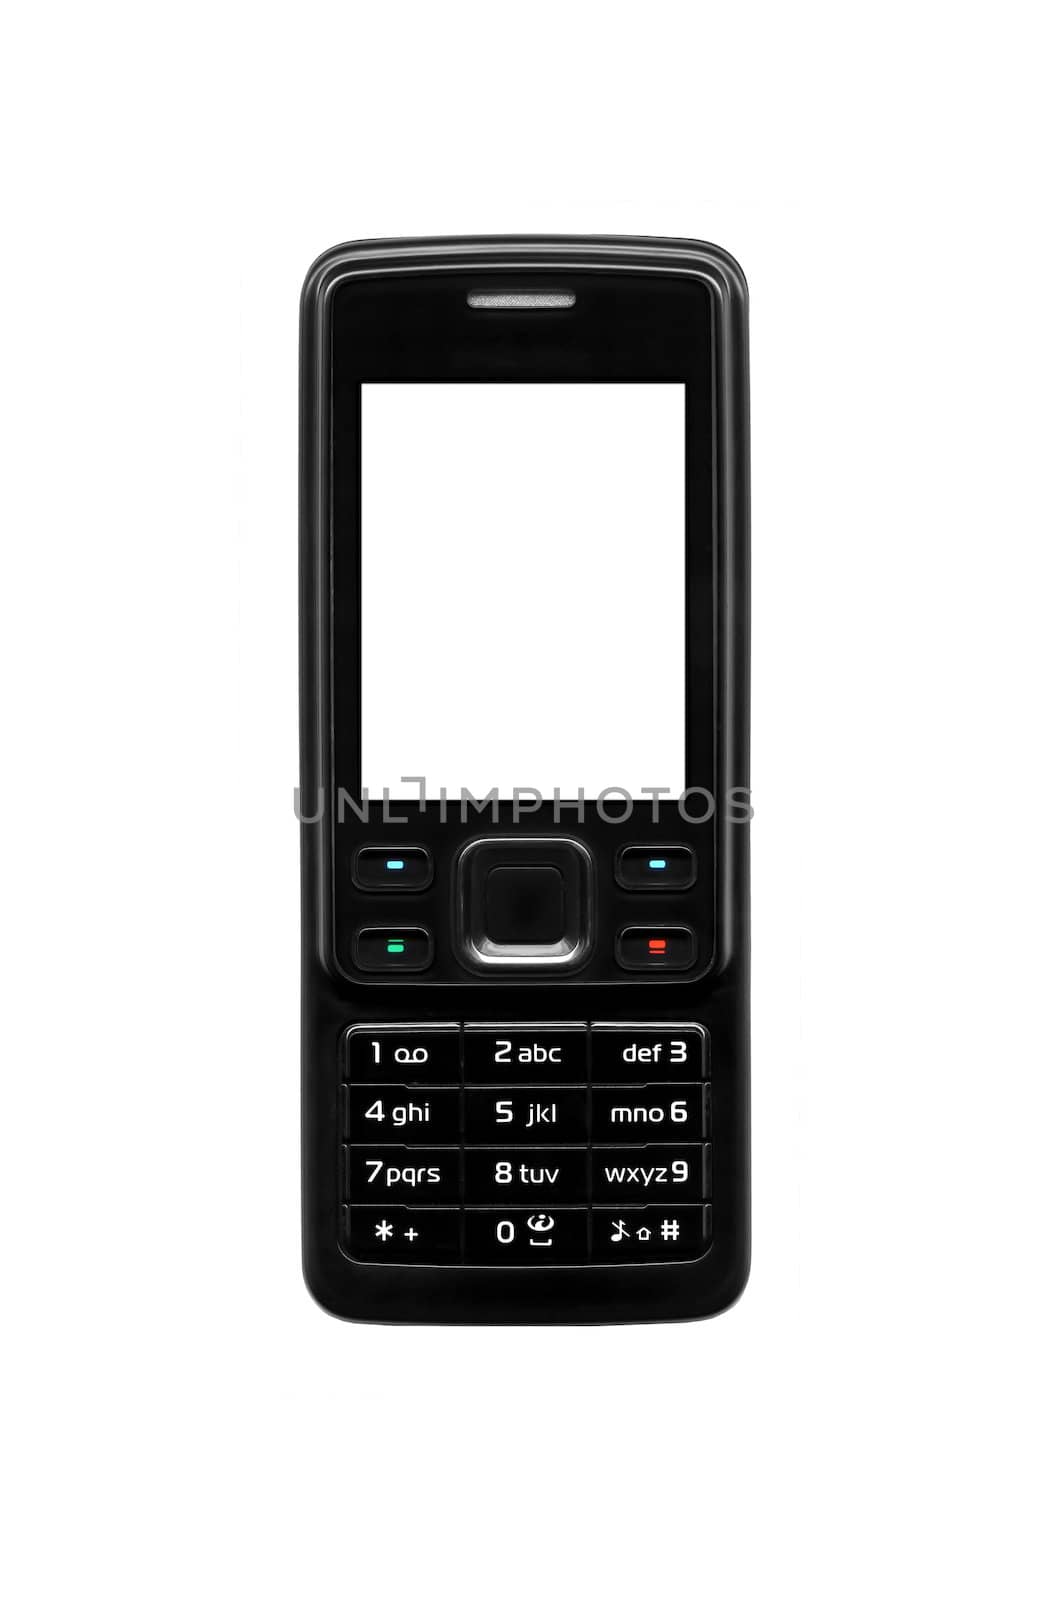 An illustration of a nice mobile phone